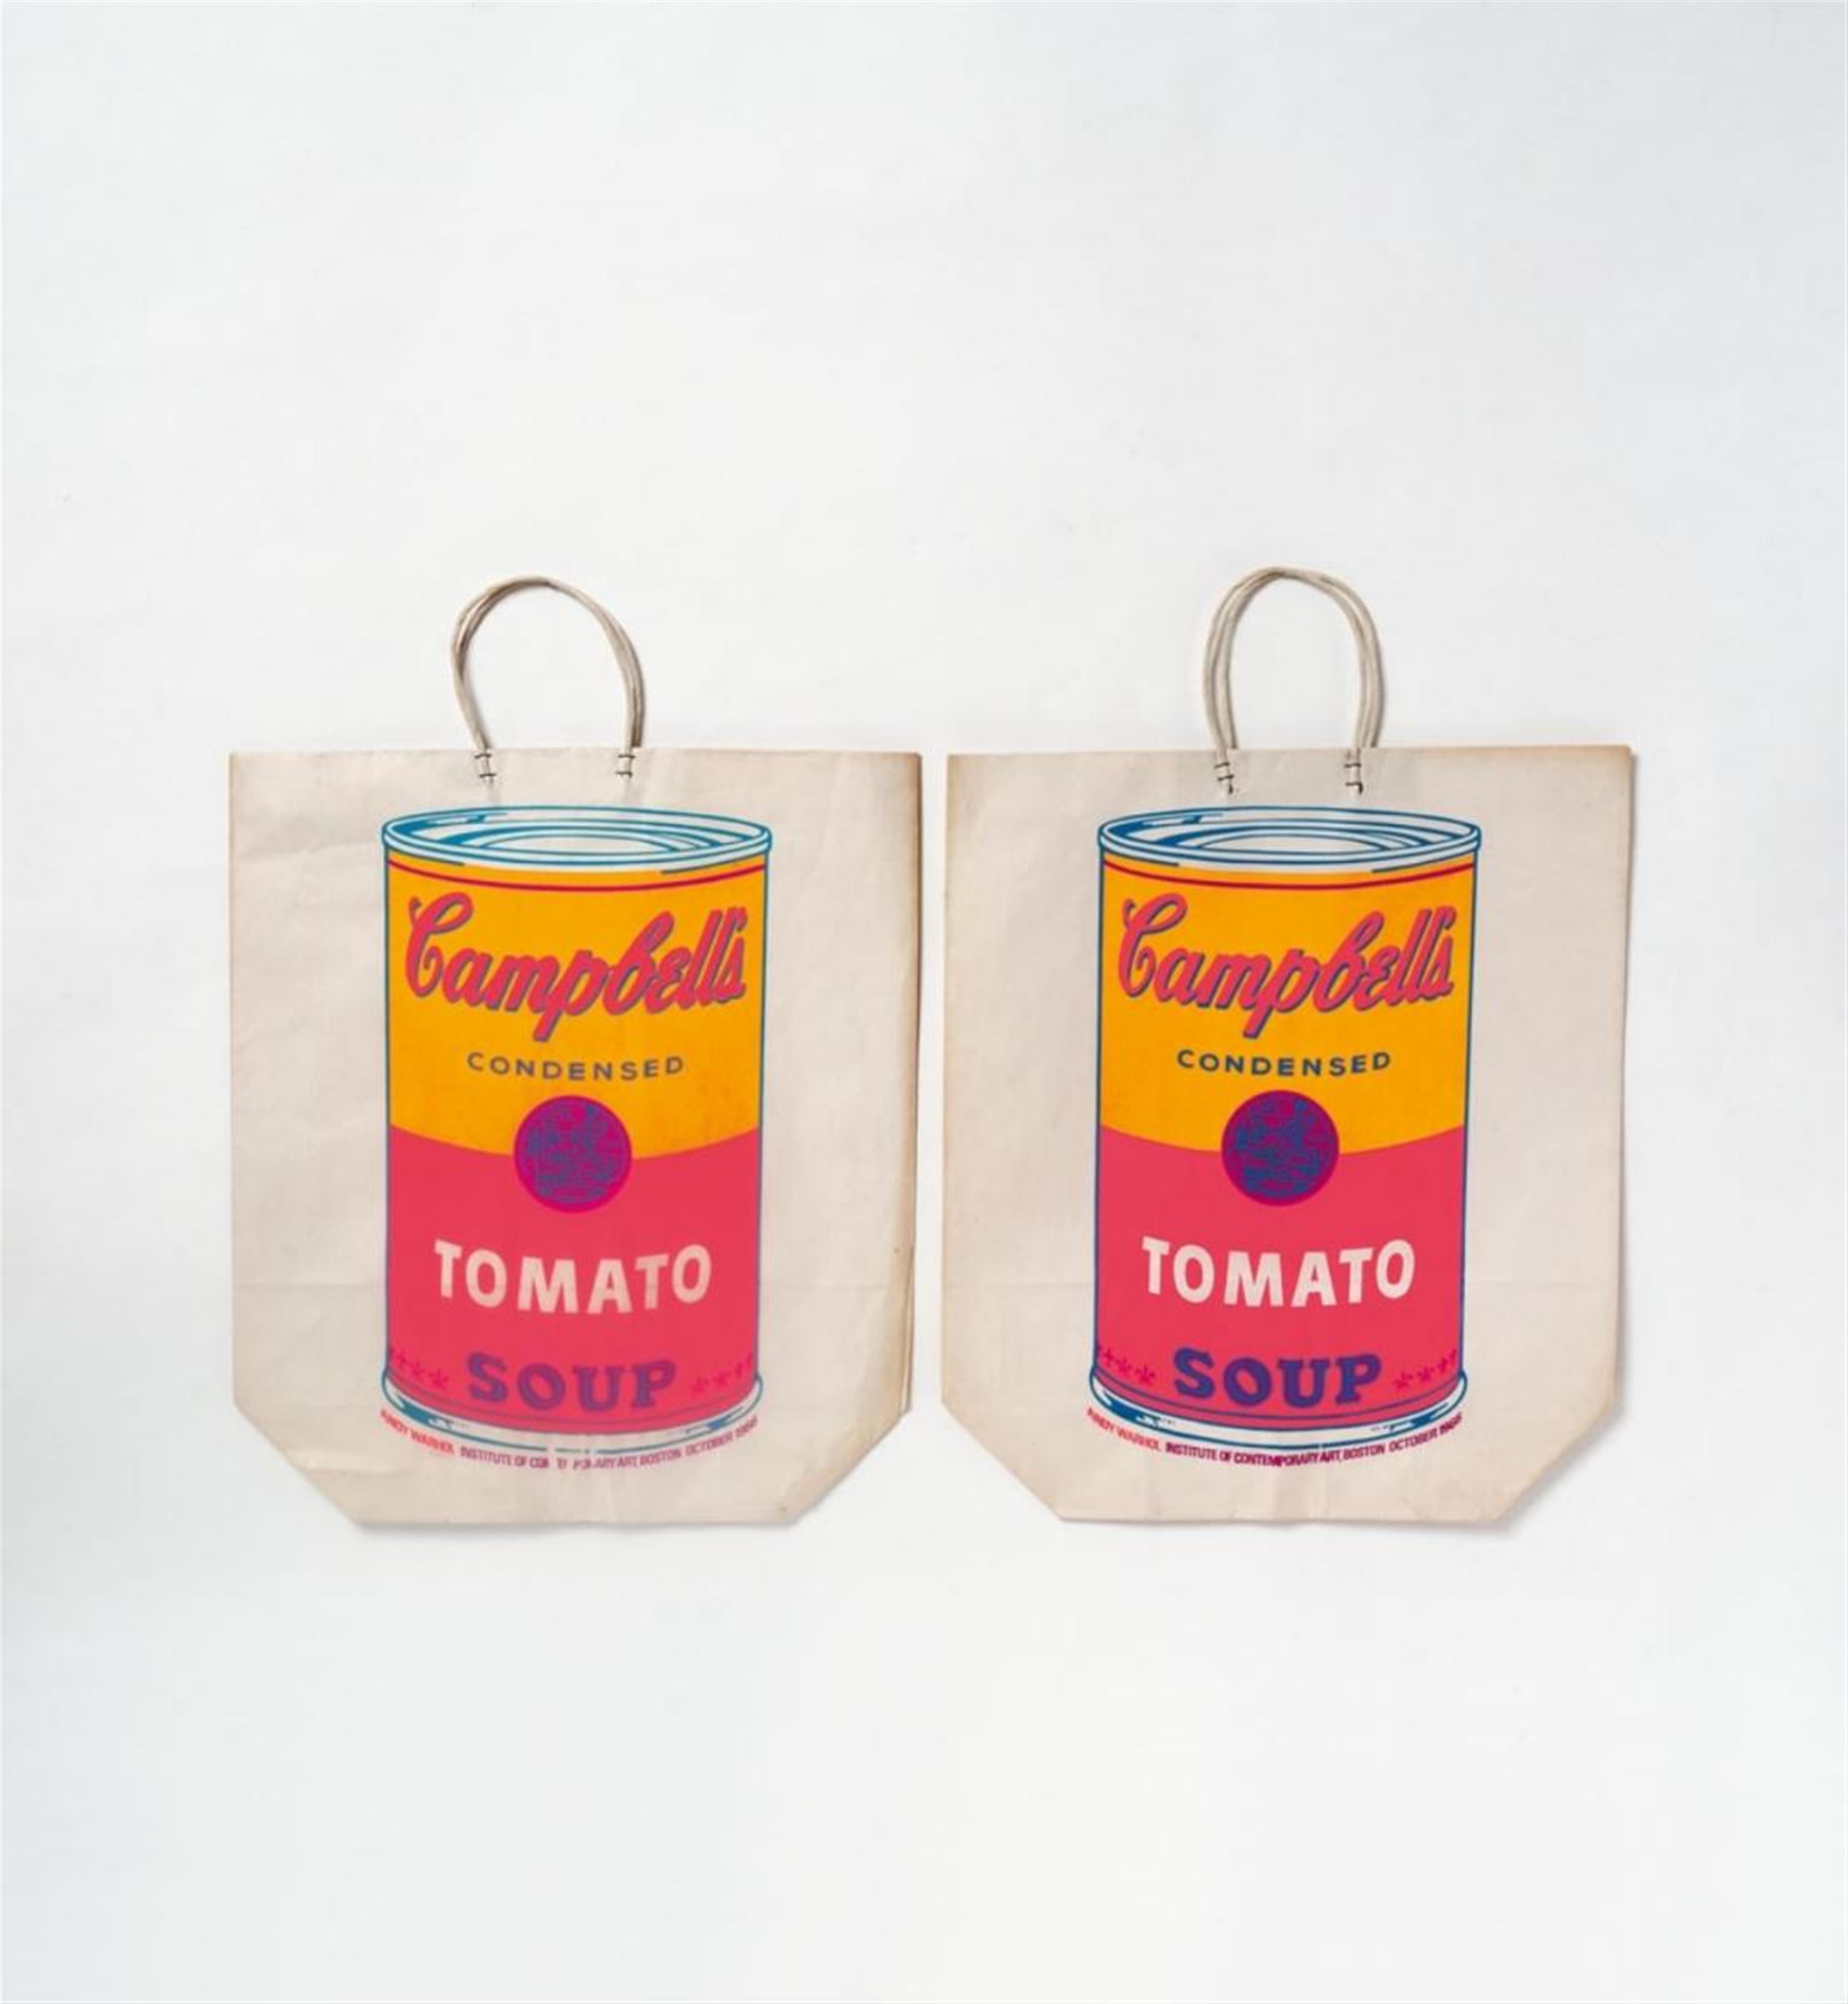 Andy Warhol - Campbell's Soup Can on Shooping Bag - image-1